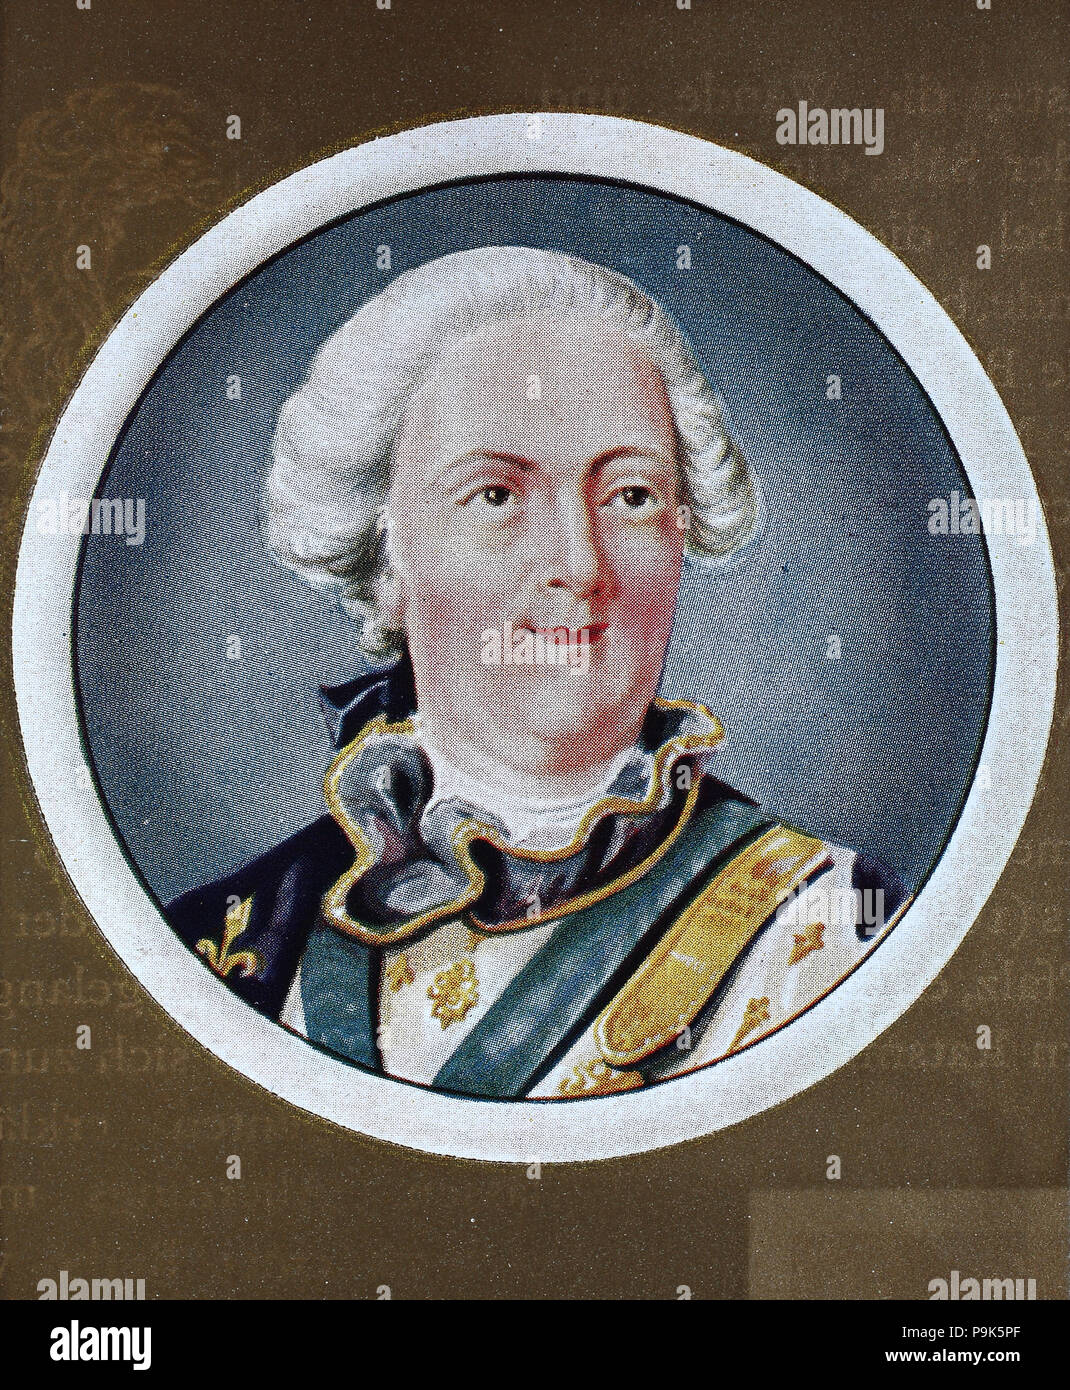 Louis XV, King of France (1710-1774) - 64 Parishes